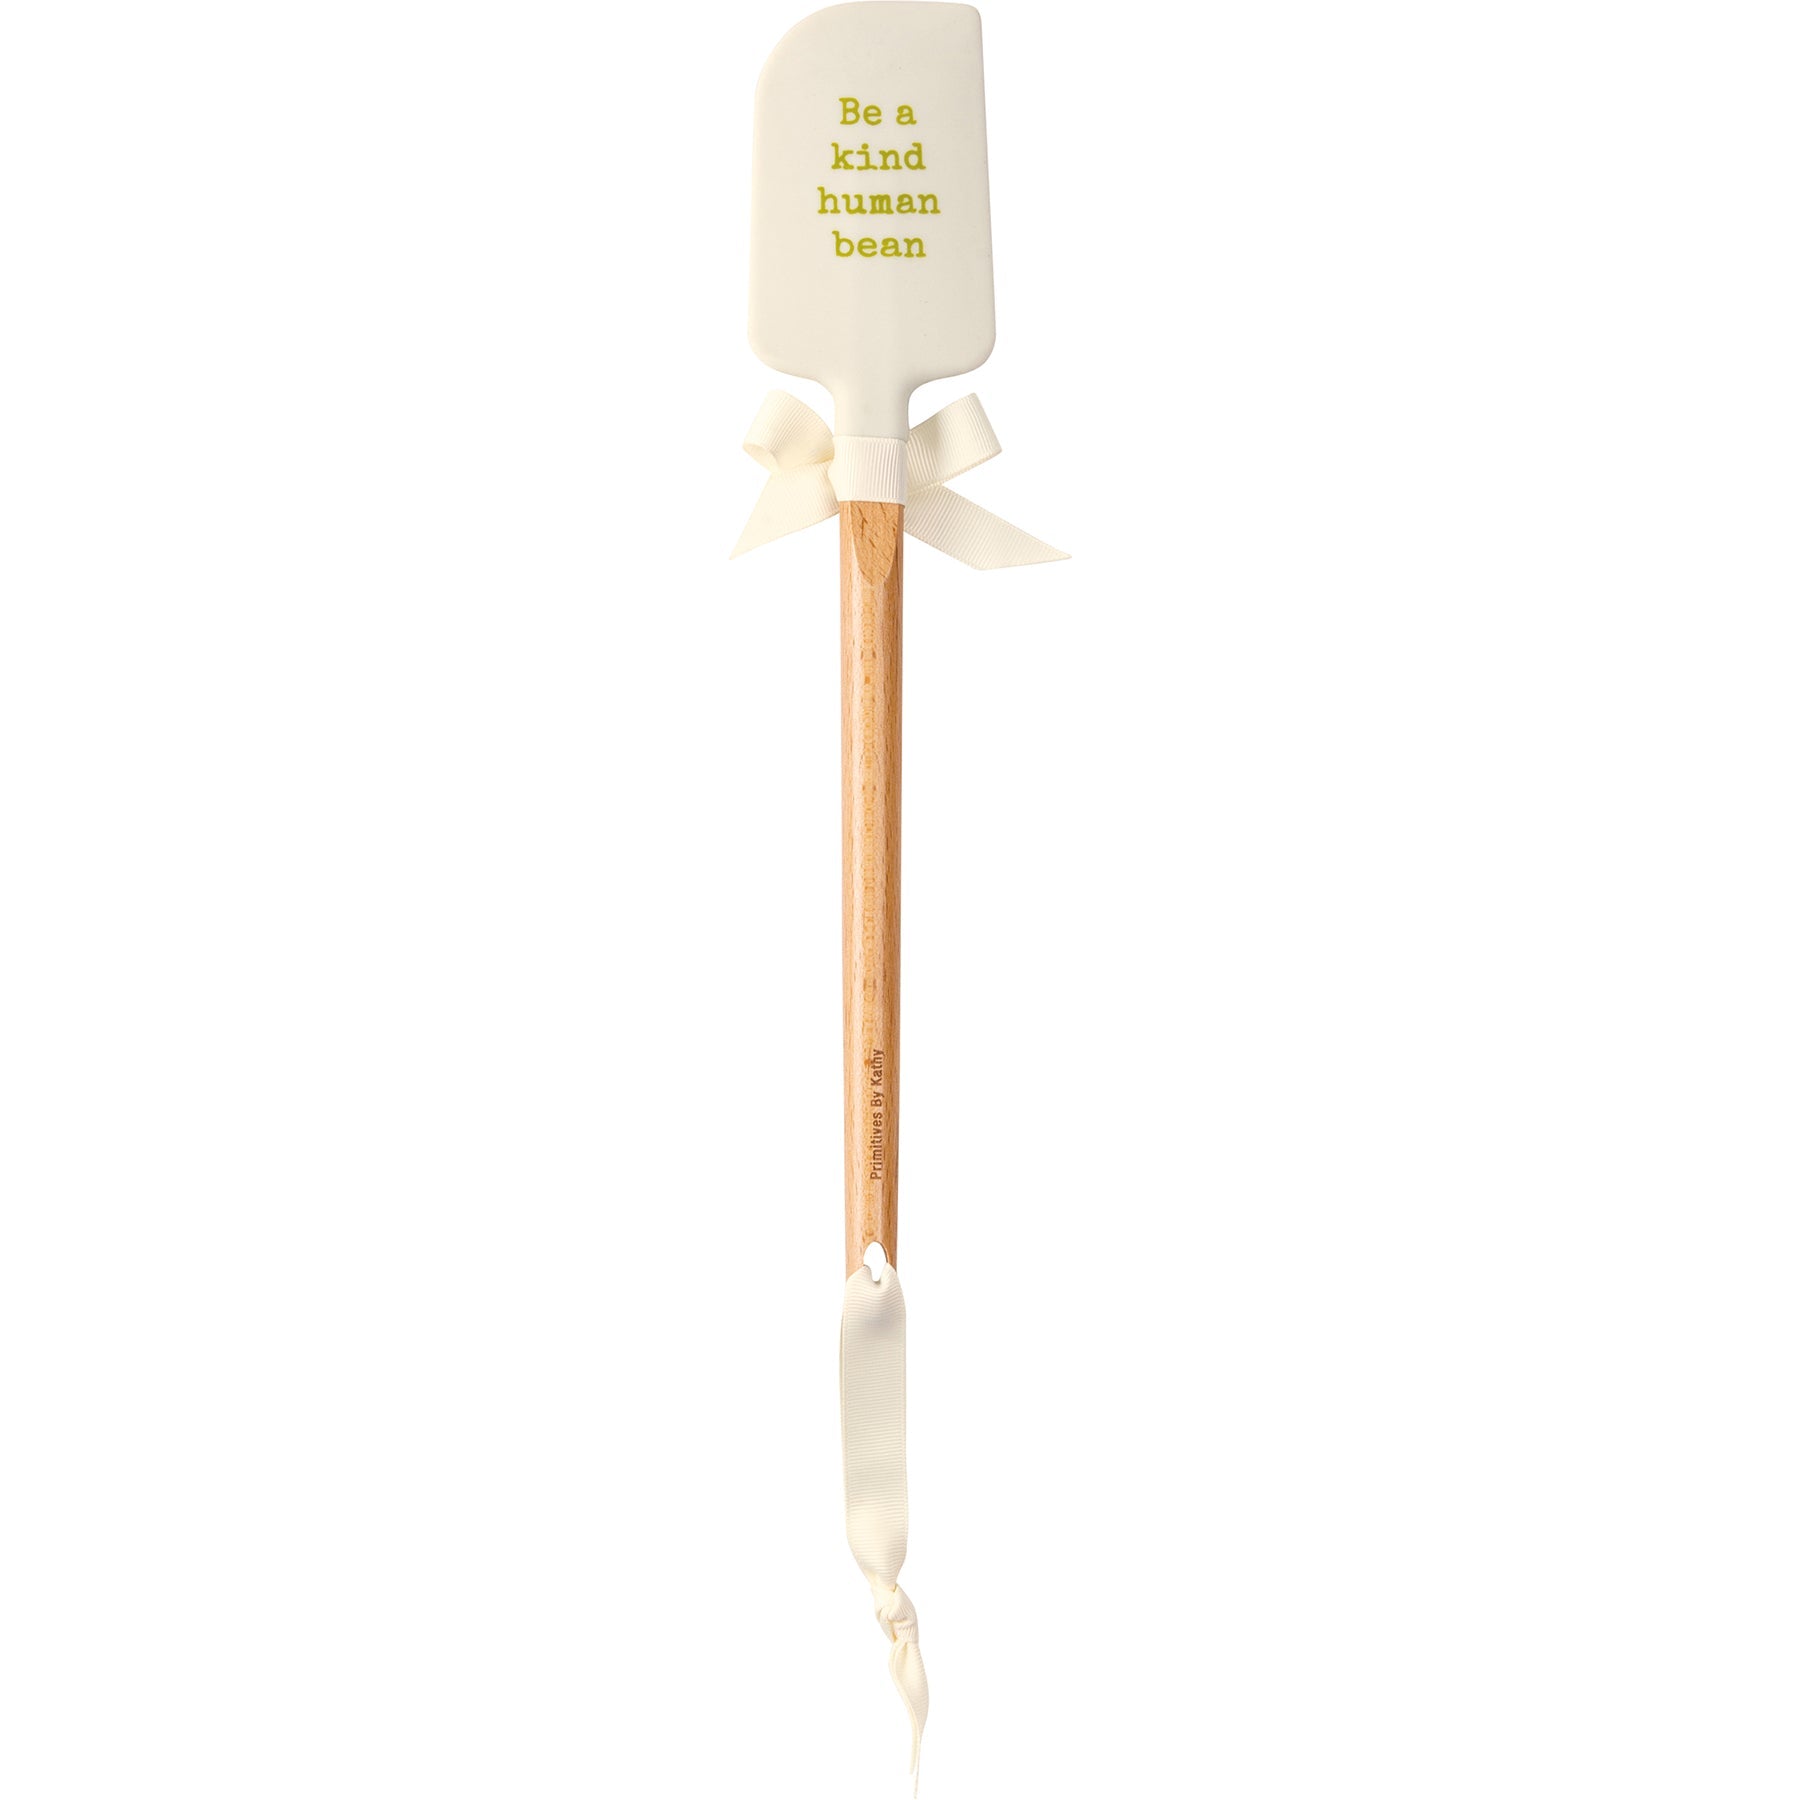 Be A Kind Human Bean Spatula With A Wooden Handle